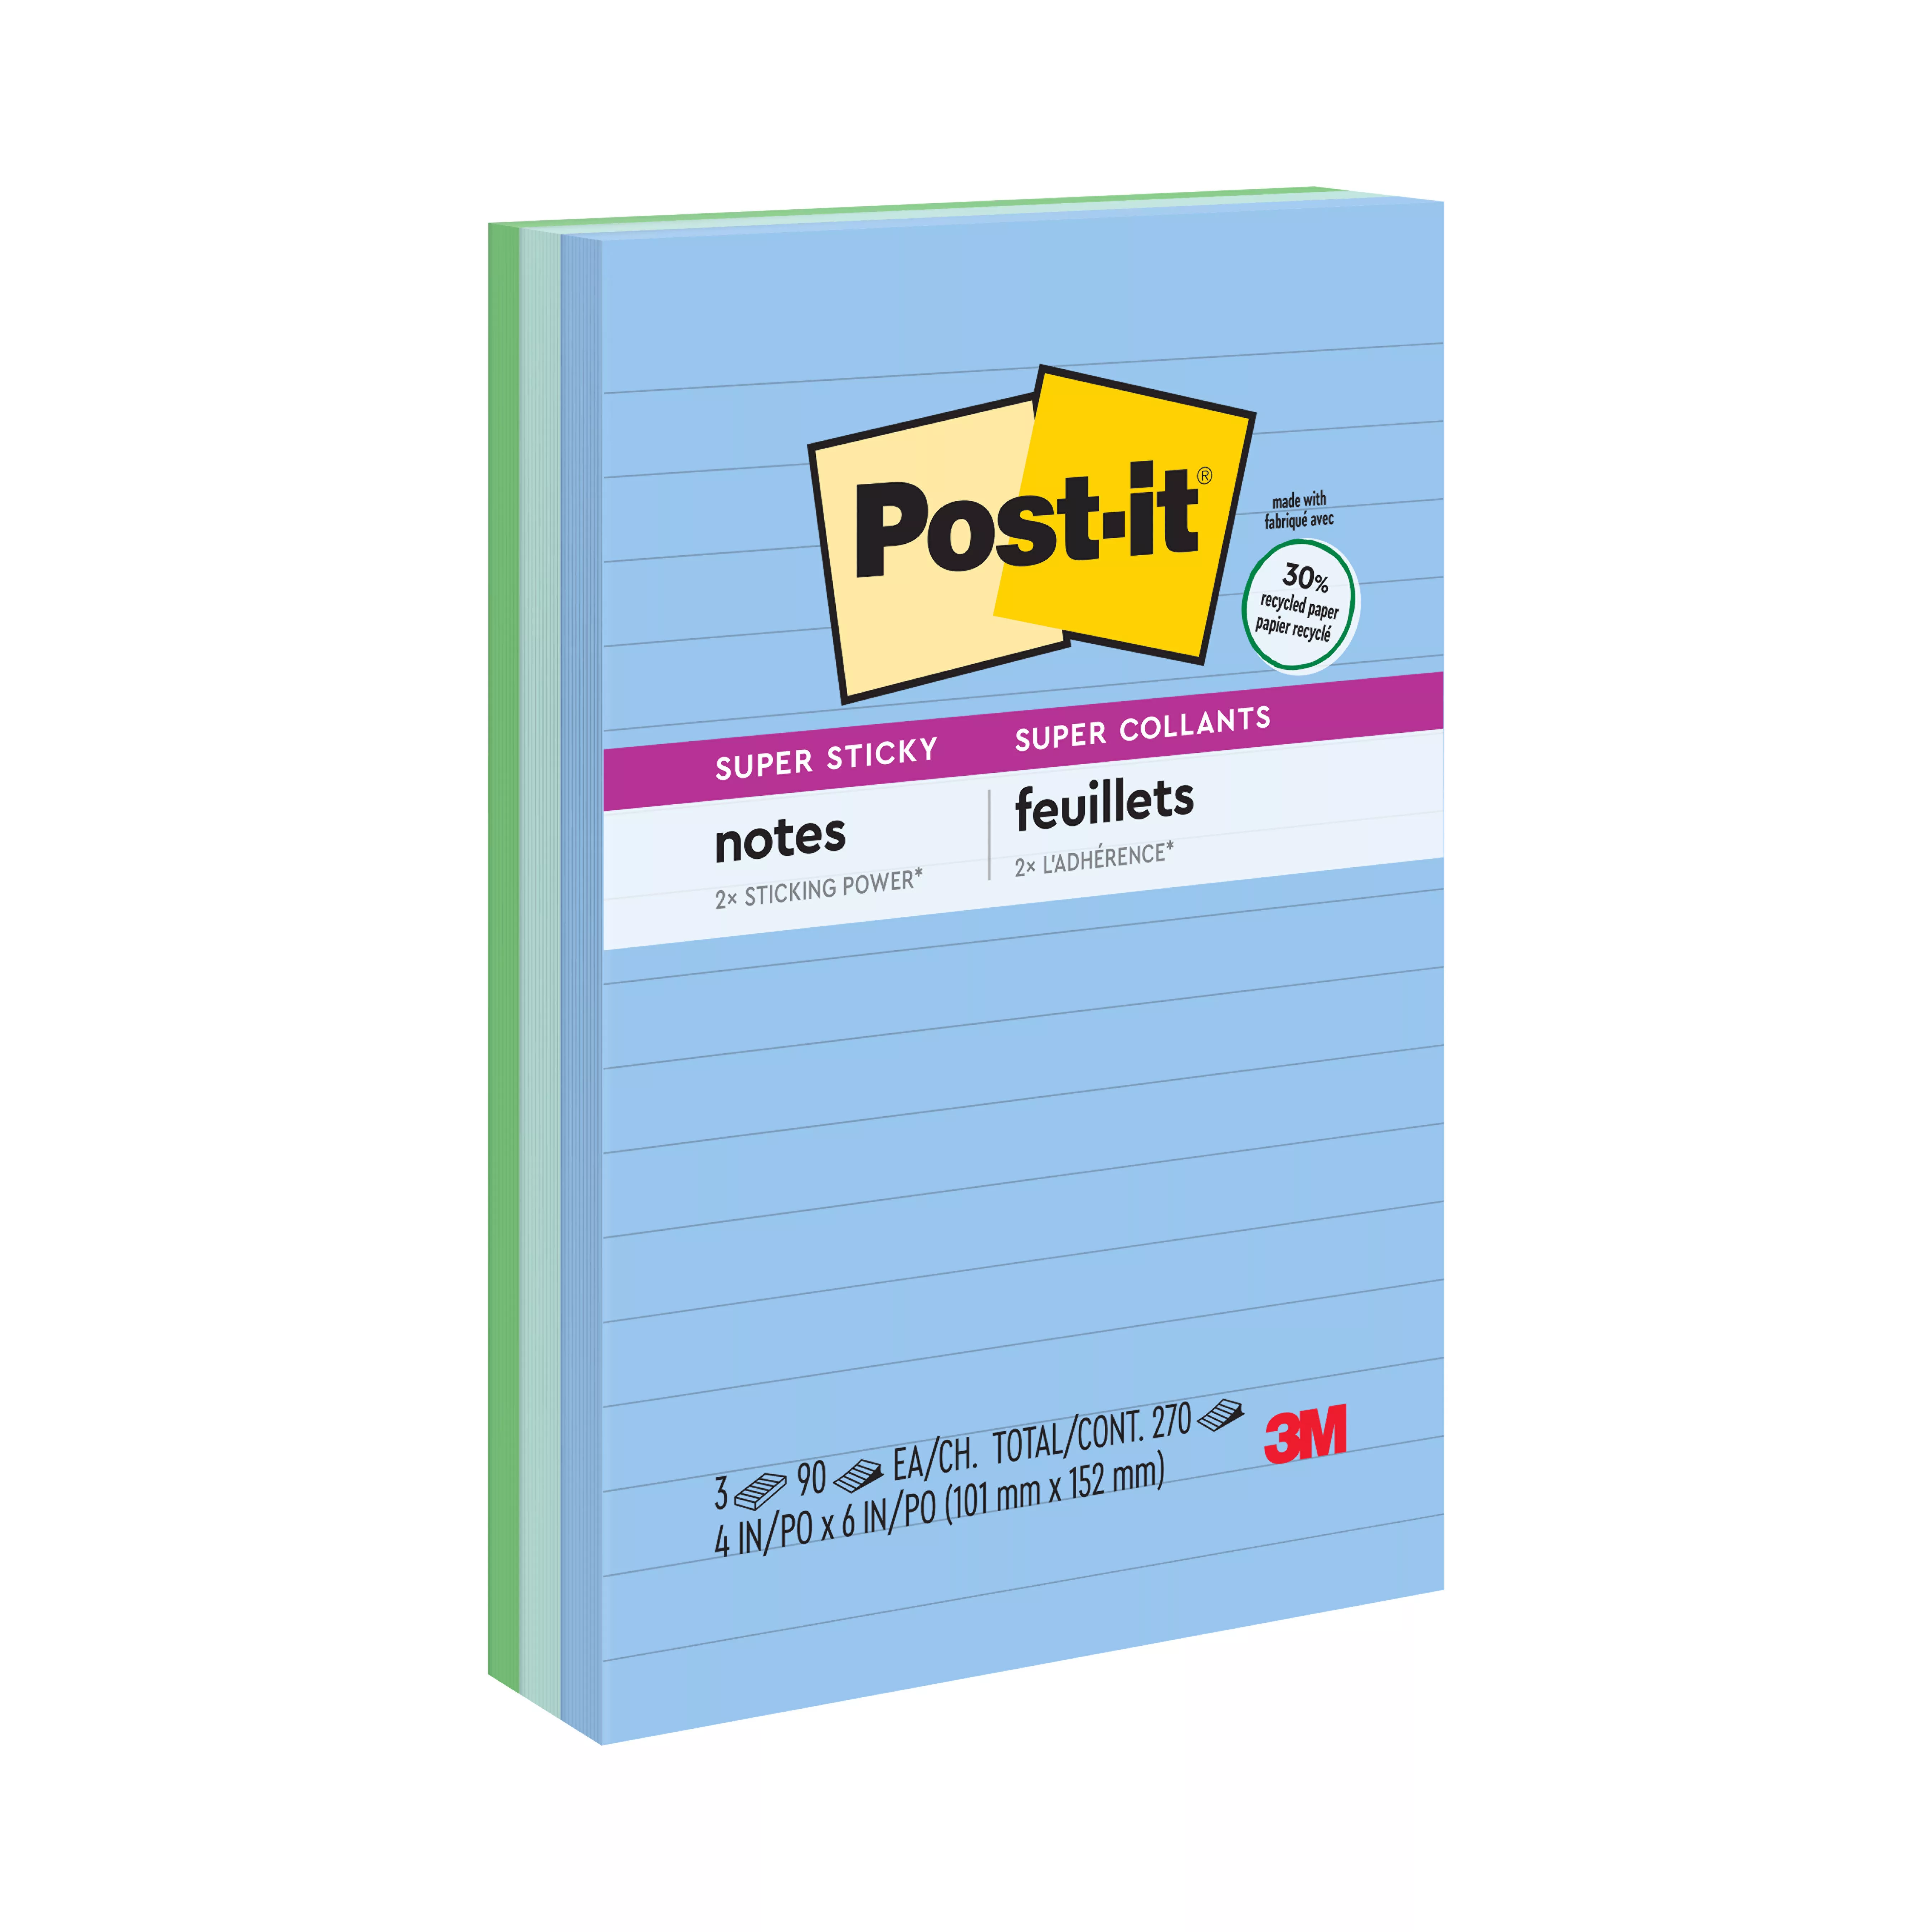 Post-it® Super Sticky Recycled Notes 660-3SST, 4 in x 6 in (101 mm x 152 mm), Bora Bora Colors